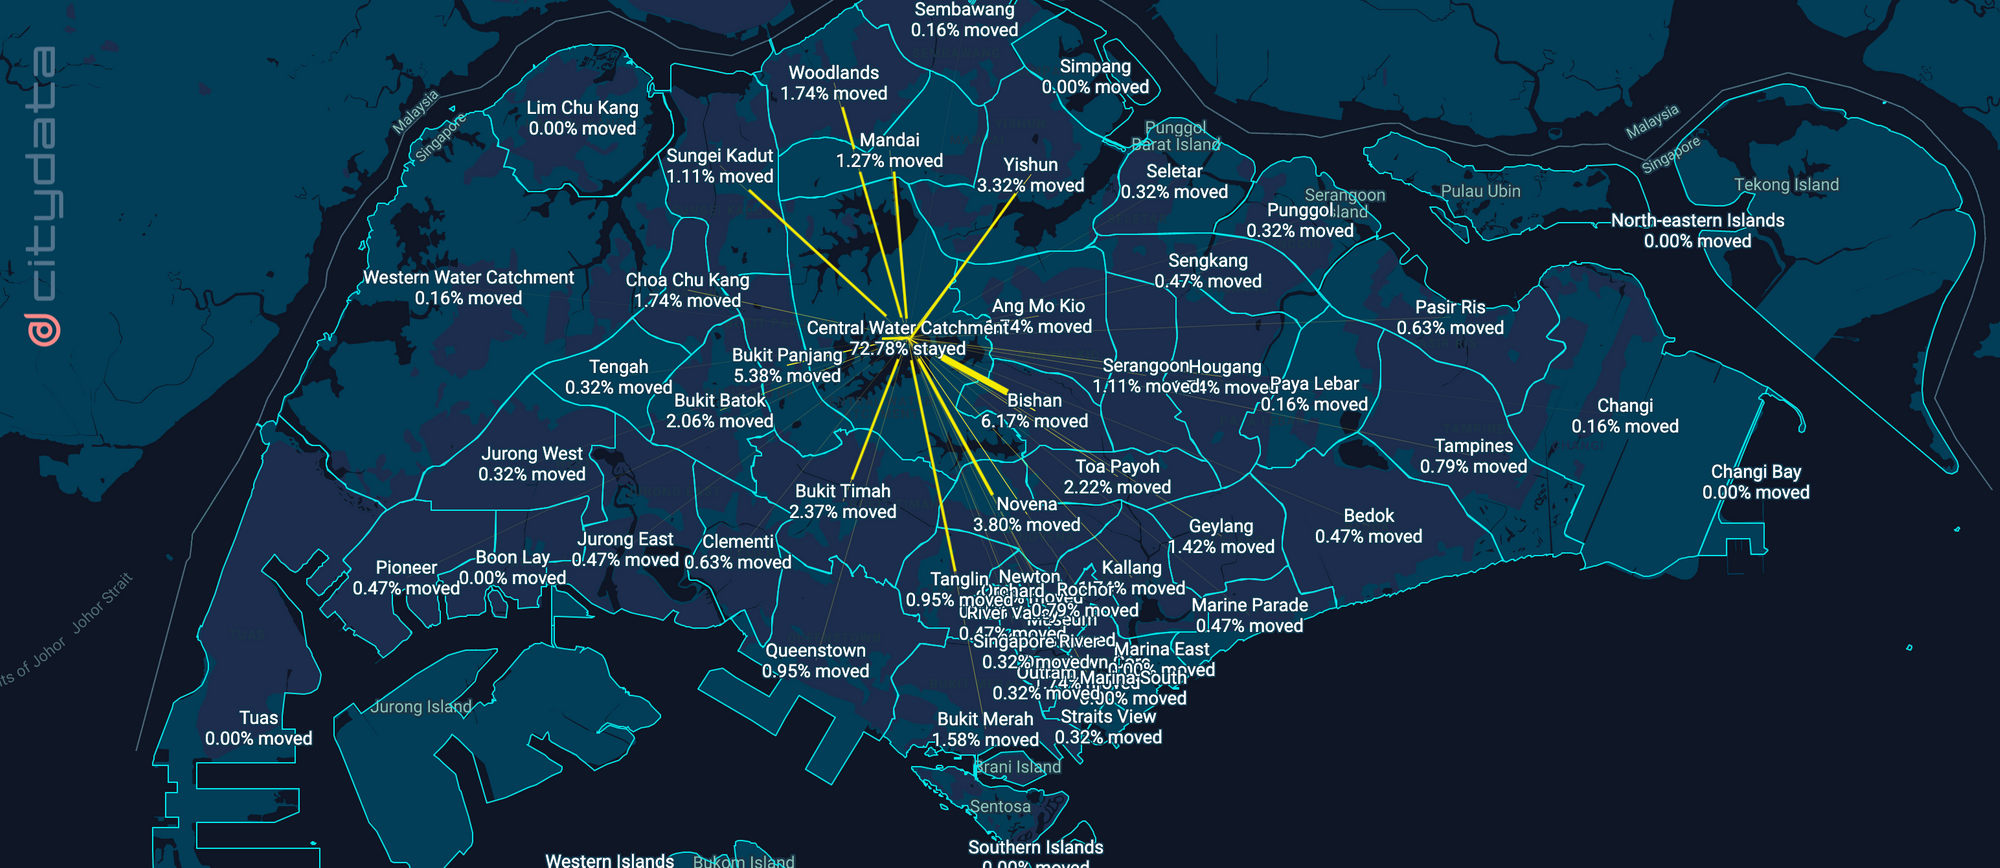 Measuring movement for Singapore's 55 planning areas